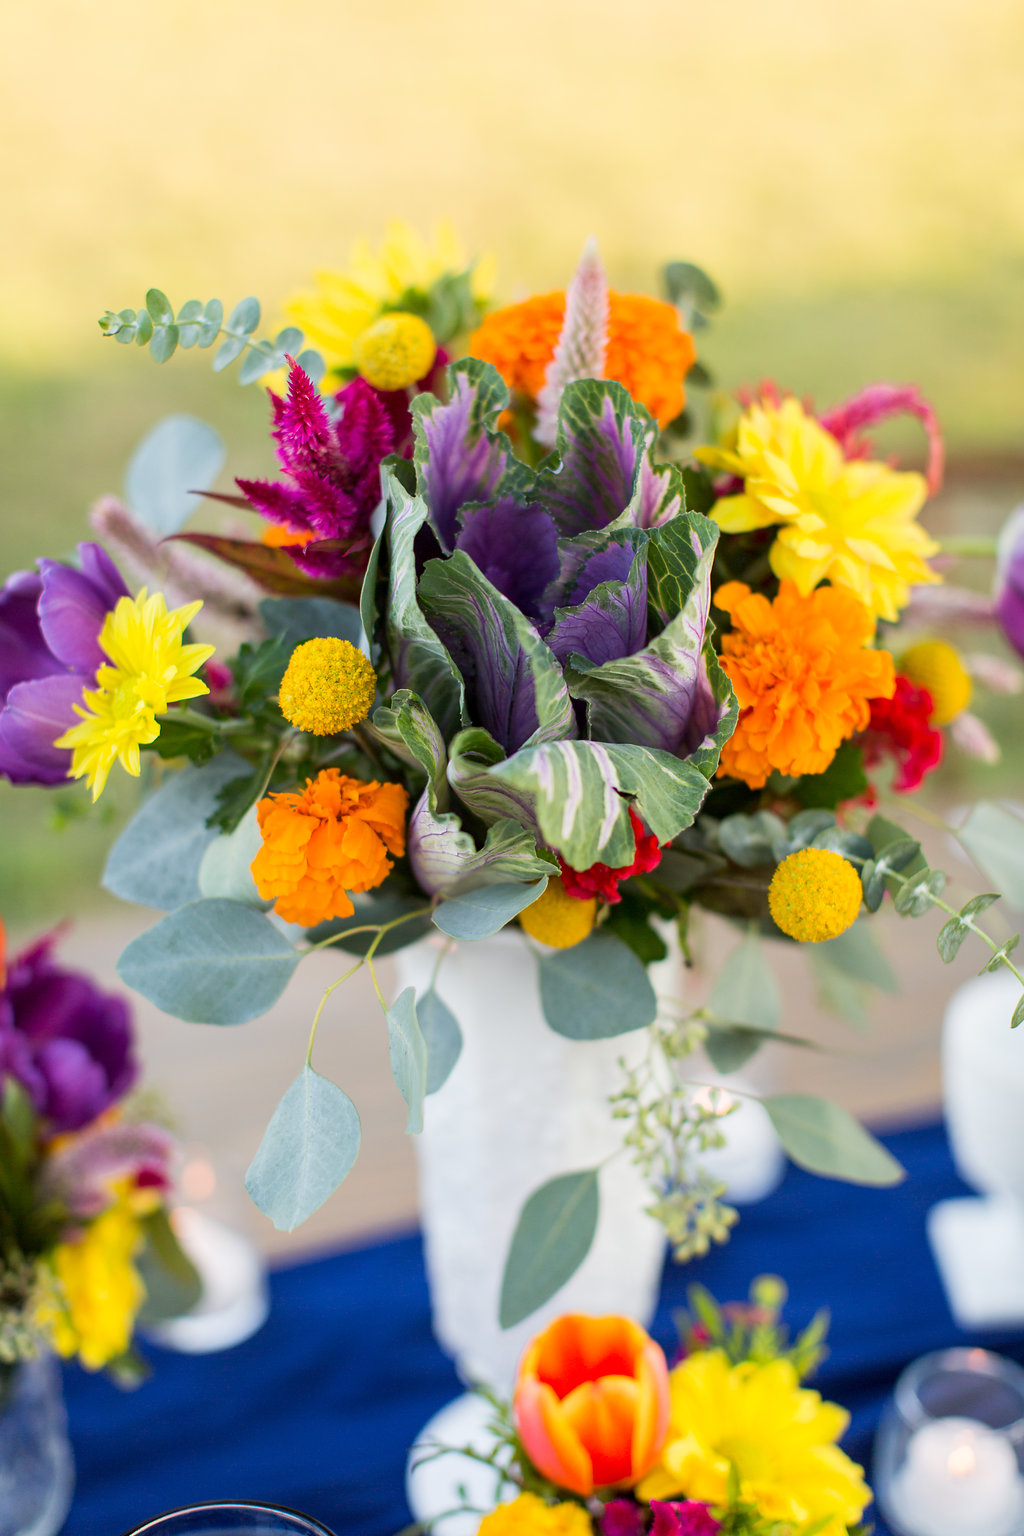 Colorful and unique fall wedding inspiration designed by Darcy Hamilton Wedding Finishings with flowers by Touch of Whimsy and photography by Pine and Blossom.